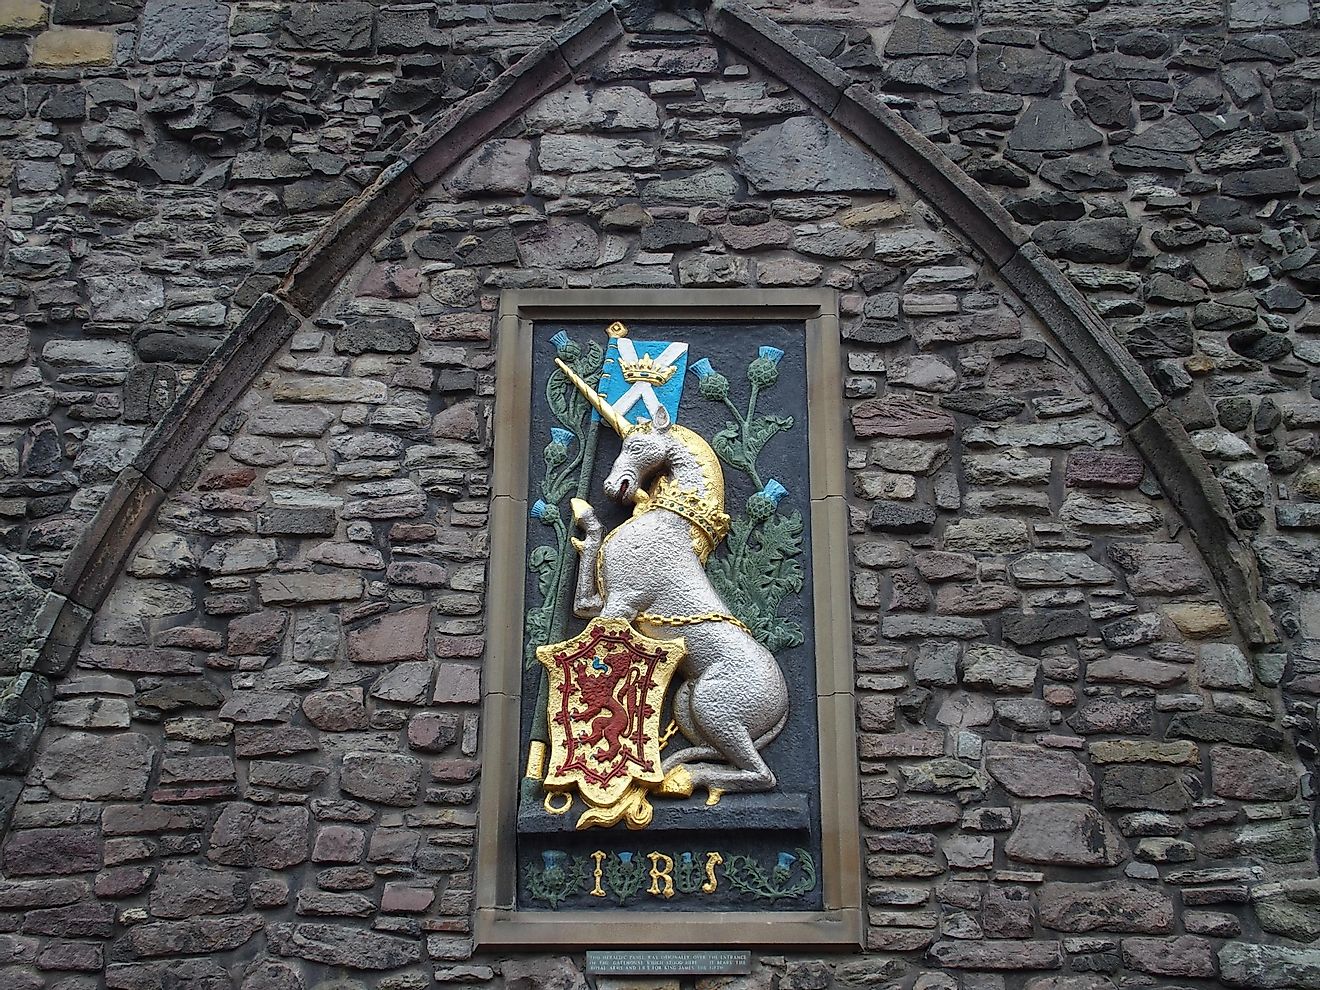 Unicorn of Scotland and red lion rampant on the medieval scottish stone wall